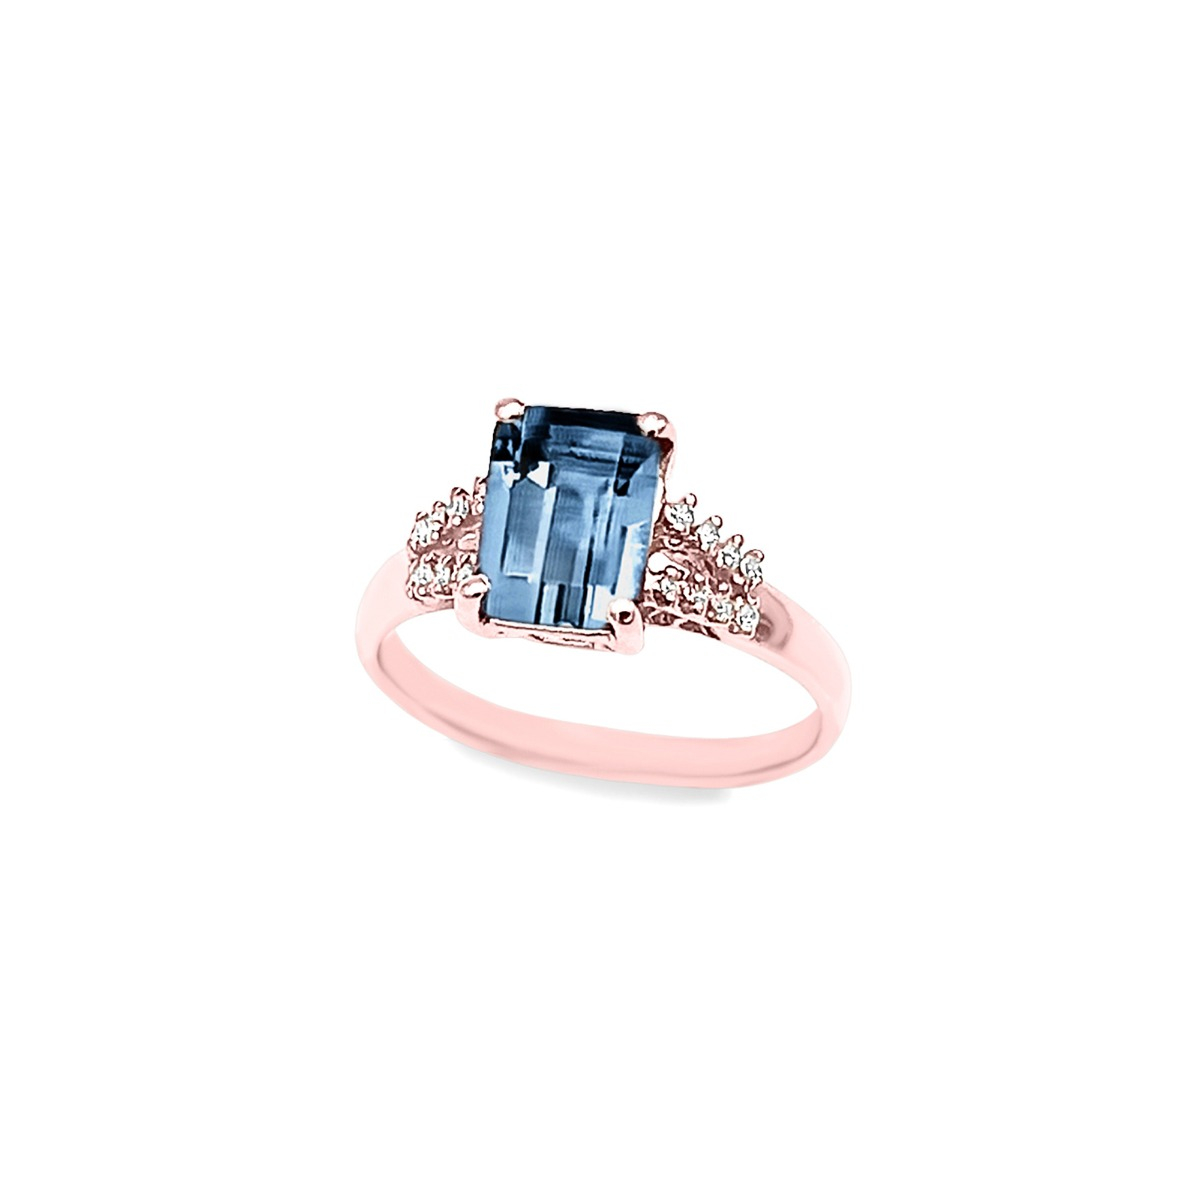 Elegant Ring In Rose Gold And Diamonds With London Blue Topaz In Octagonal Shape